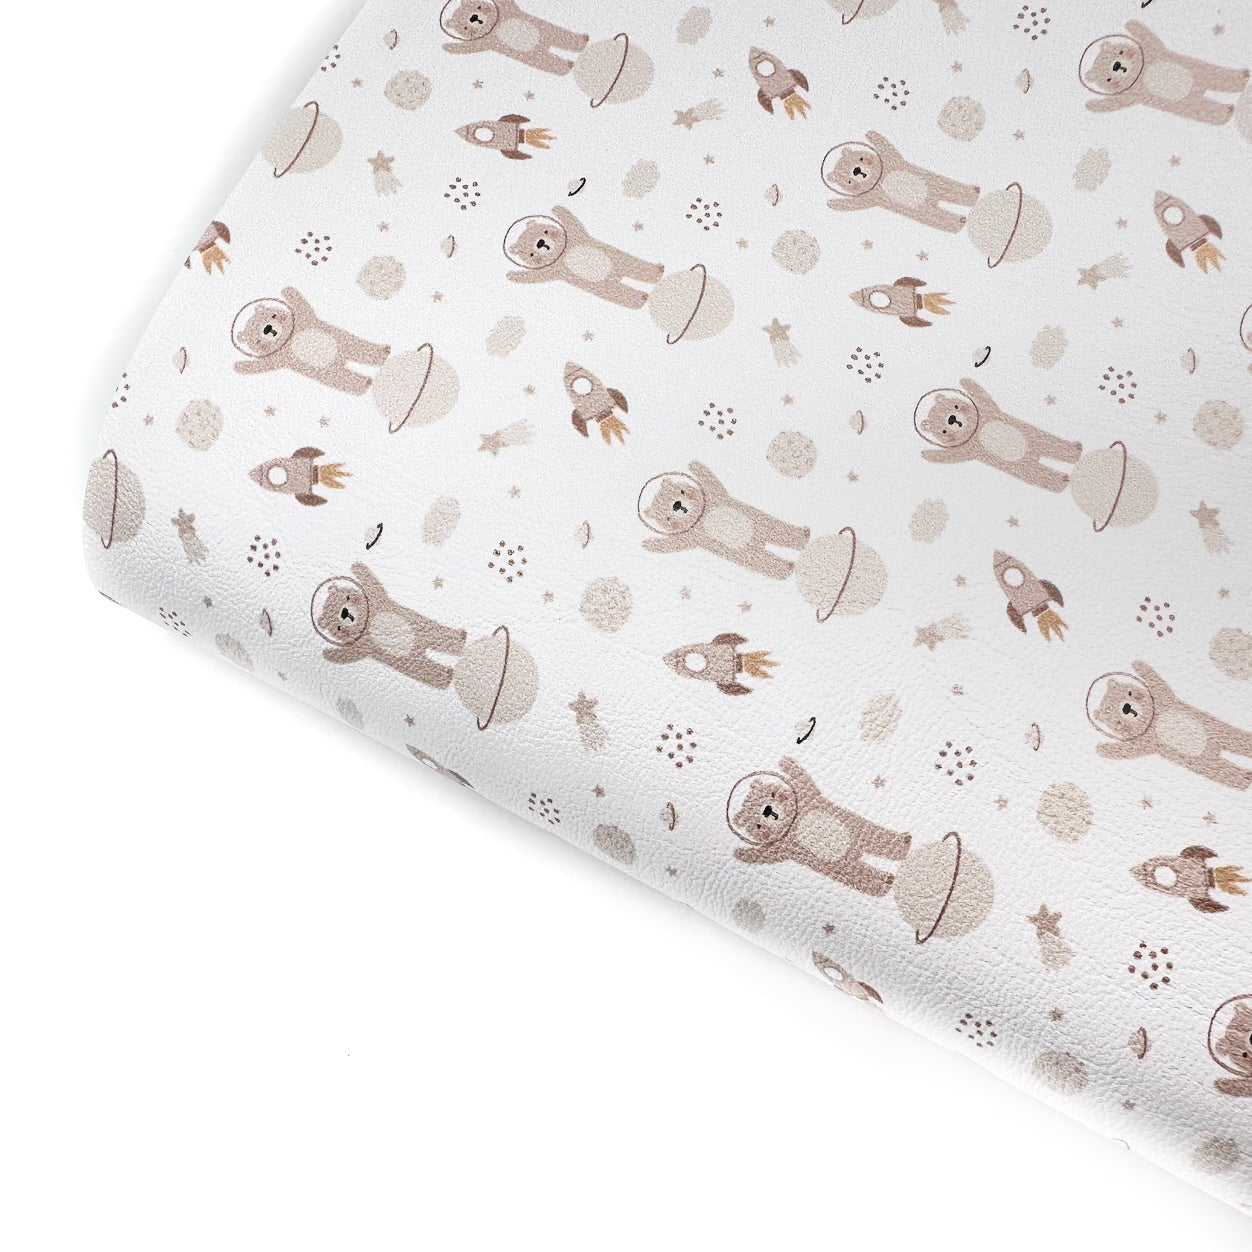 Teddy in Space Premium Faux Leather Fabric Sheets